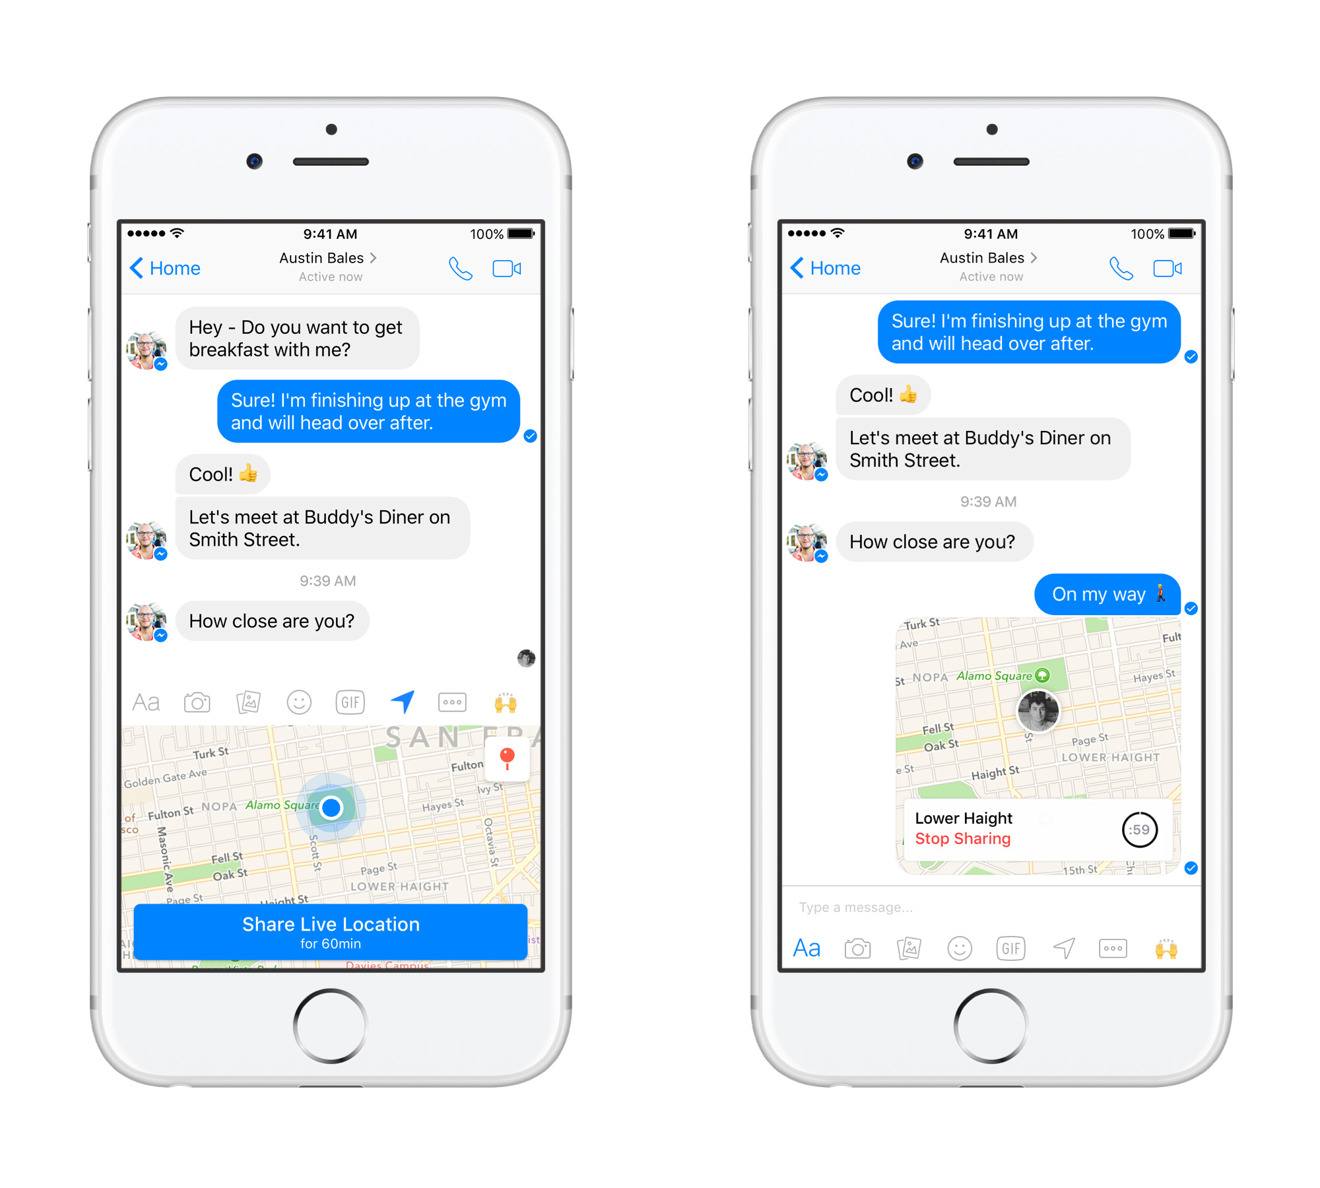 Facebook updates Messenger for Apple's iPhone & iPad with Live Location sharing